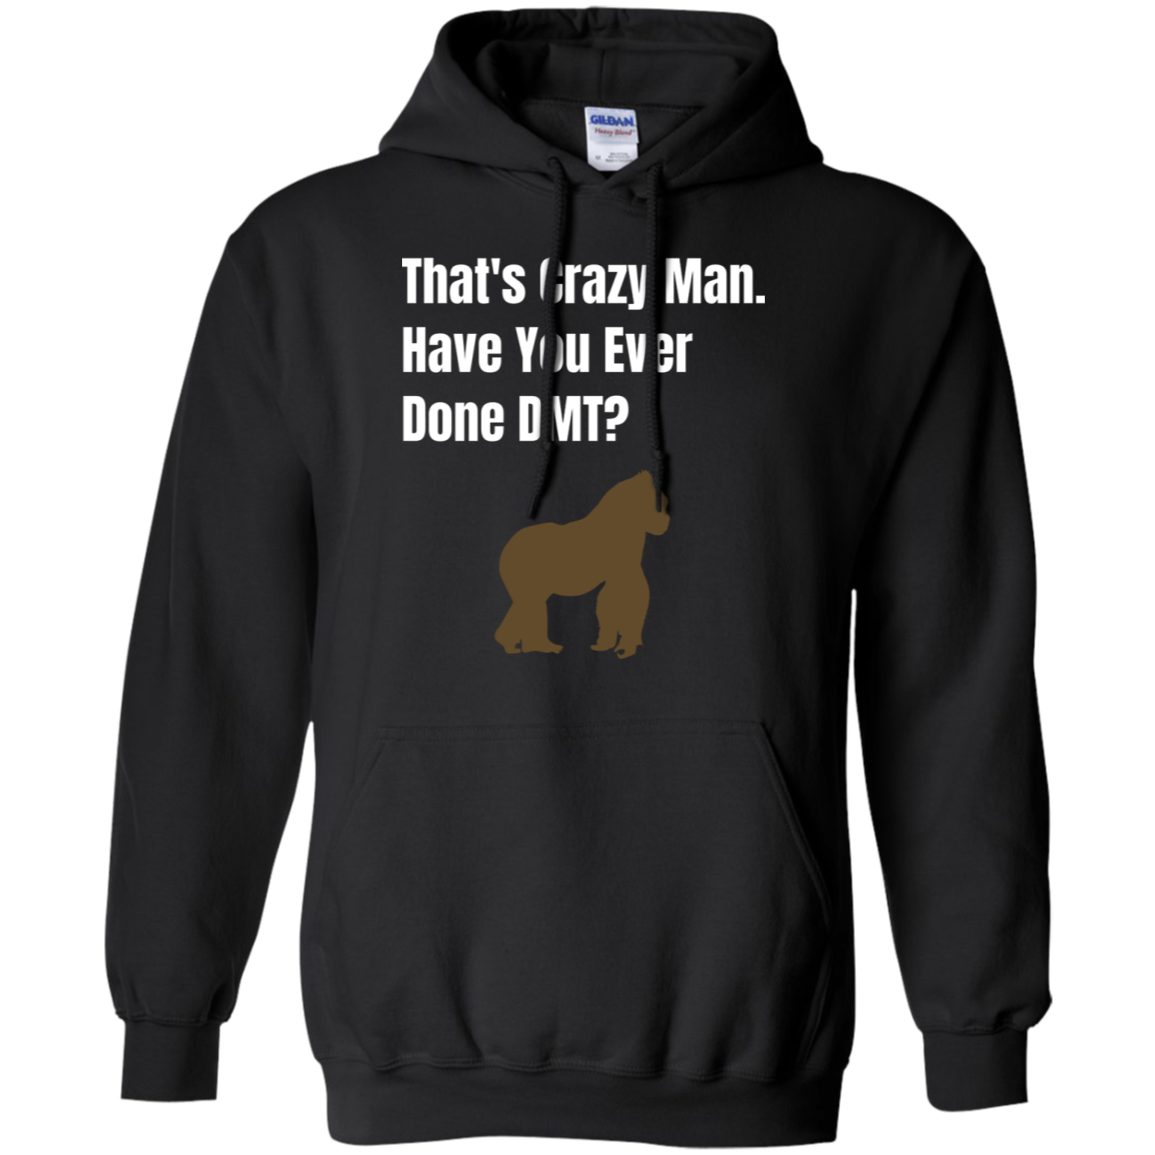 That's Crazy Man Have You Ever Done DMT? Pullover Hoodie 8 oz.